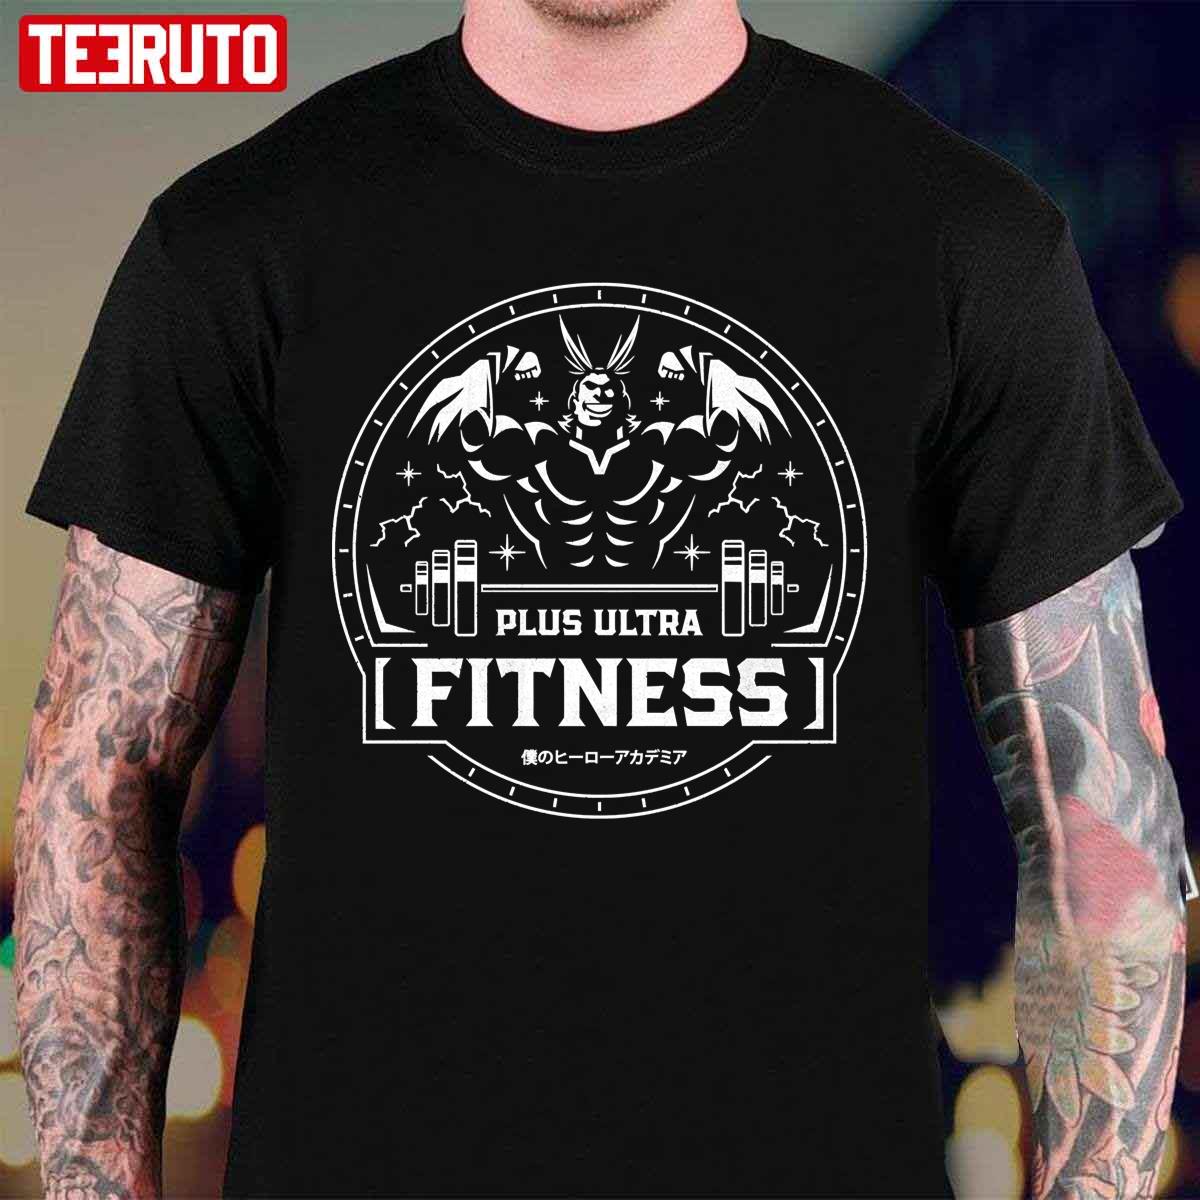 The Pro Hero Fitness All Might My Hero Academia Gym Unisex T-Shirt